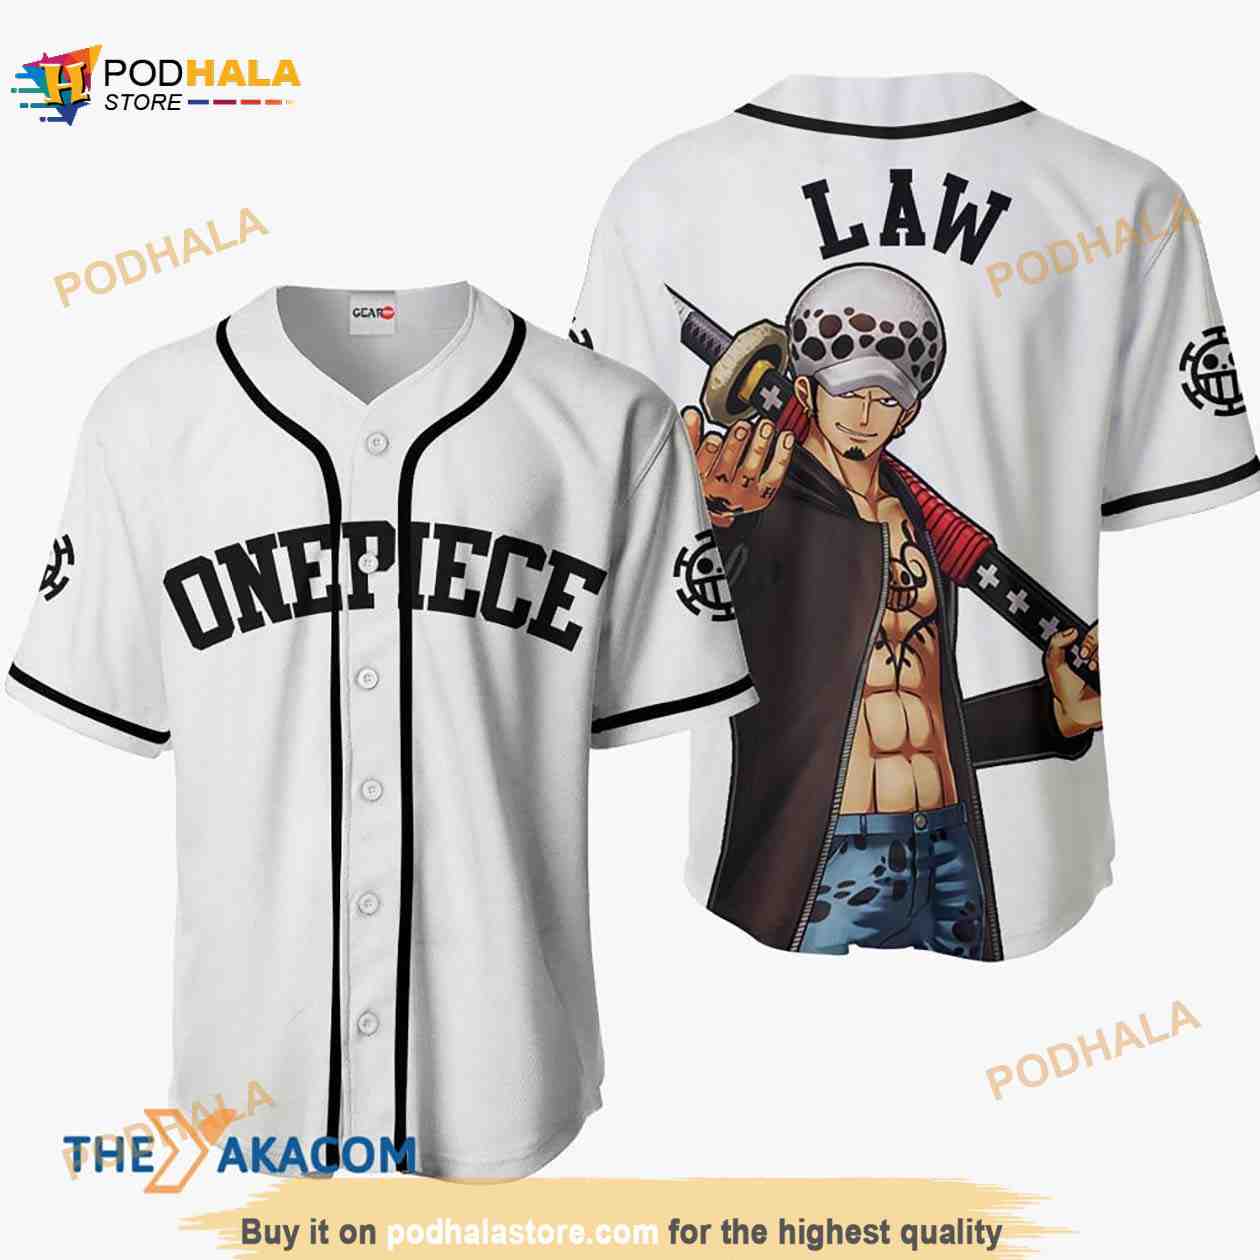 Johzenji Haikyuu Anime 3D Baseball Jersey For Women Men - Bring Your Ideas,  Thoughts And Imaginations Into Reality Today